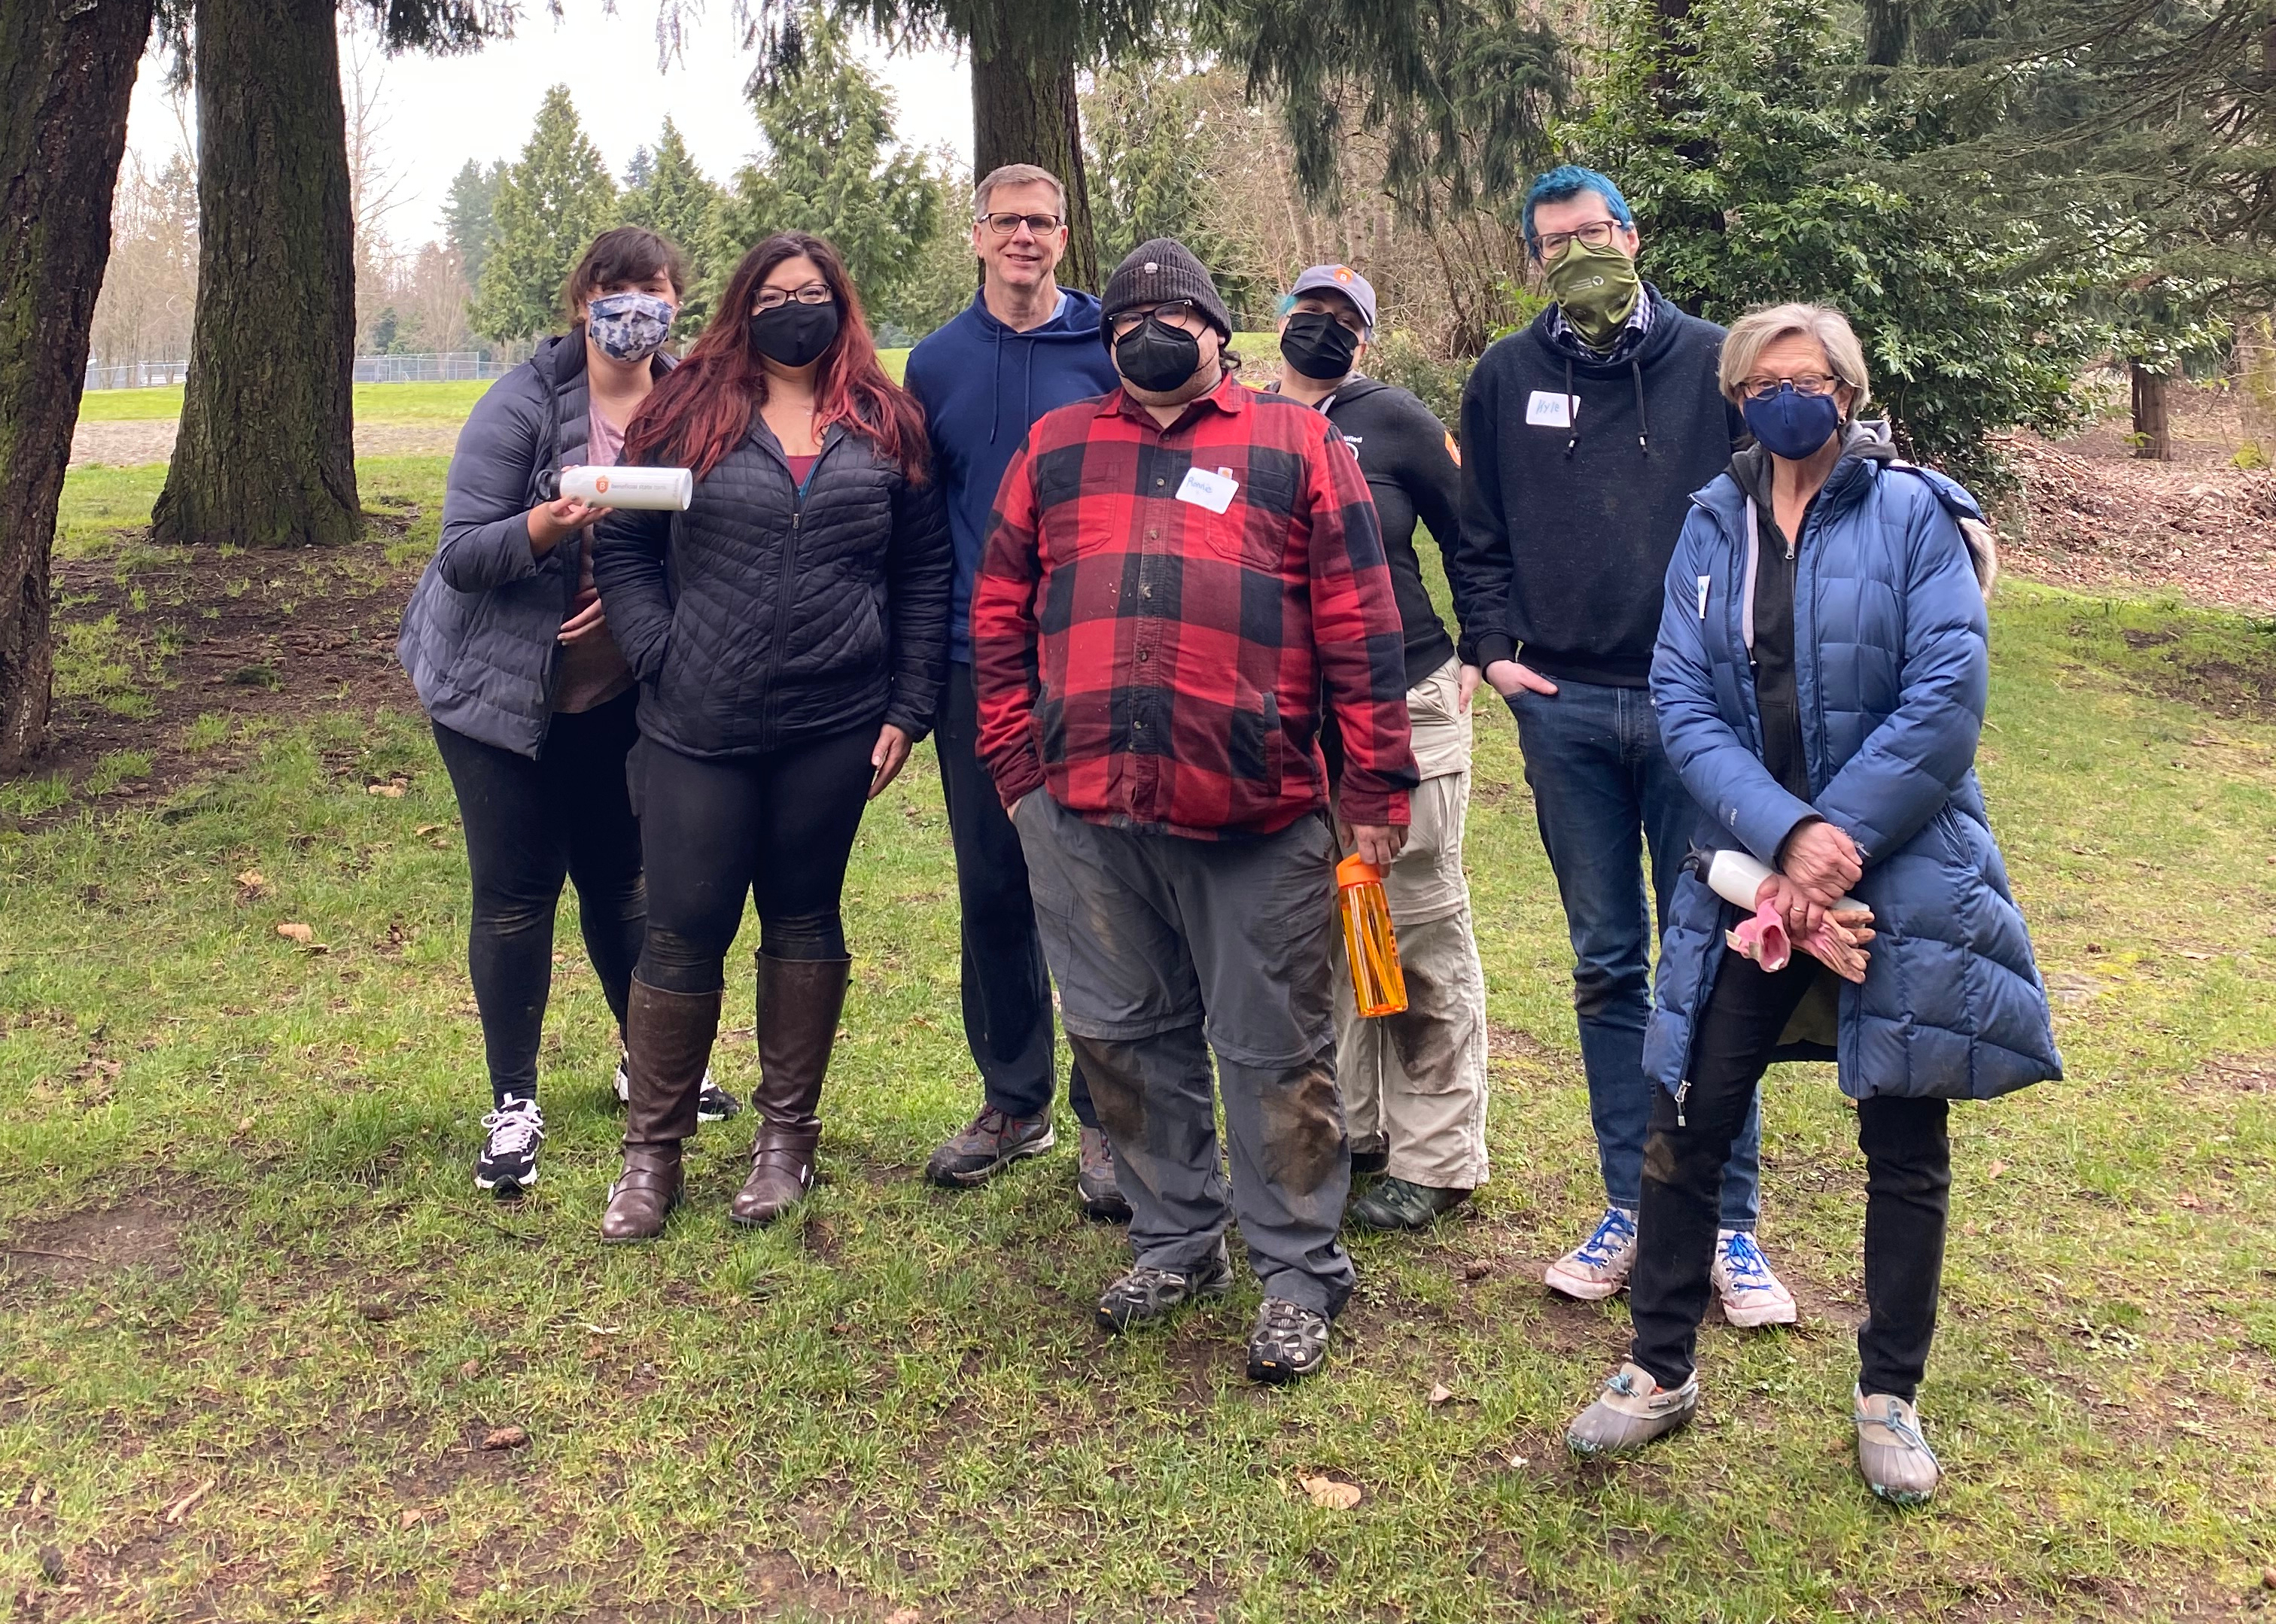 Some Beneficial State Bank Seattle staff planting trees